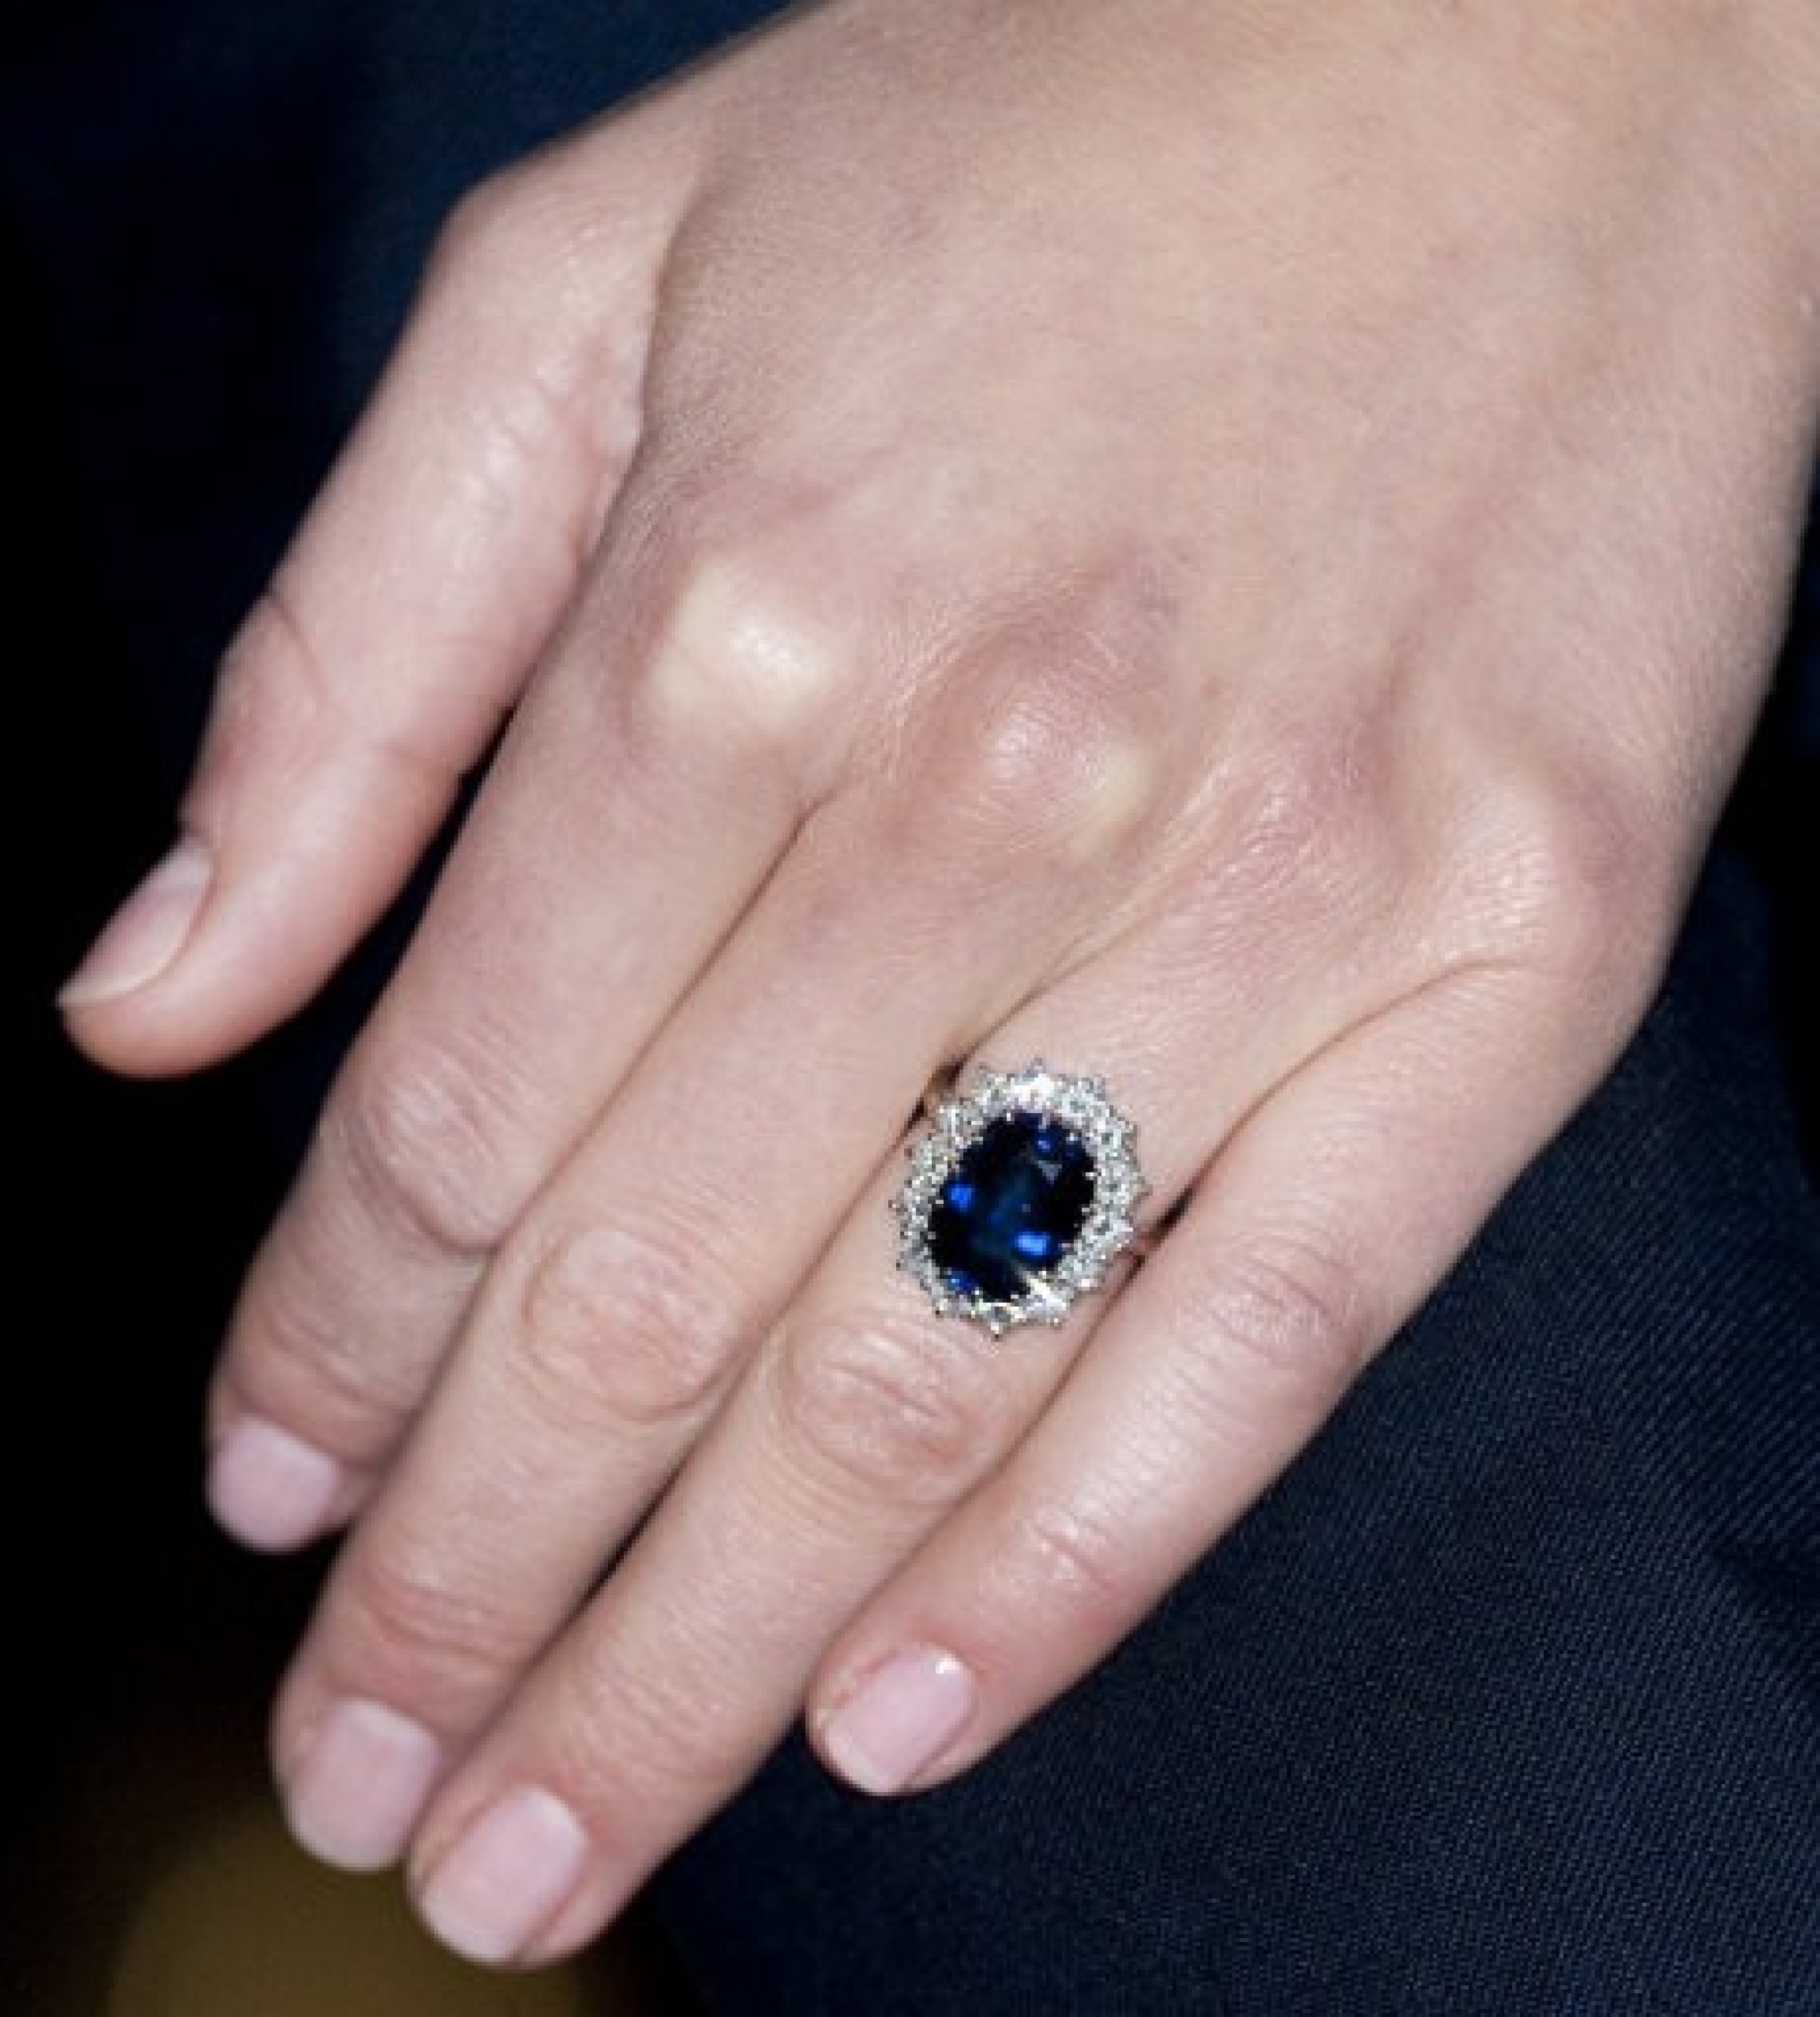 Prince William gives Kate Dianas 18-ct engagement ring.